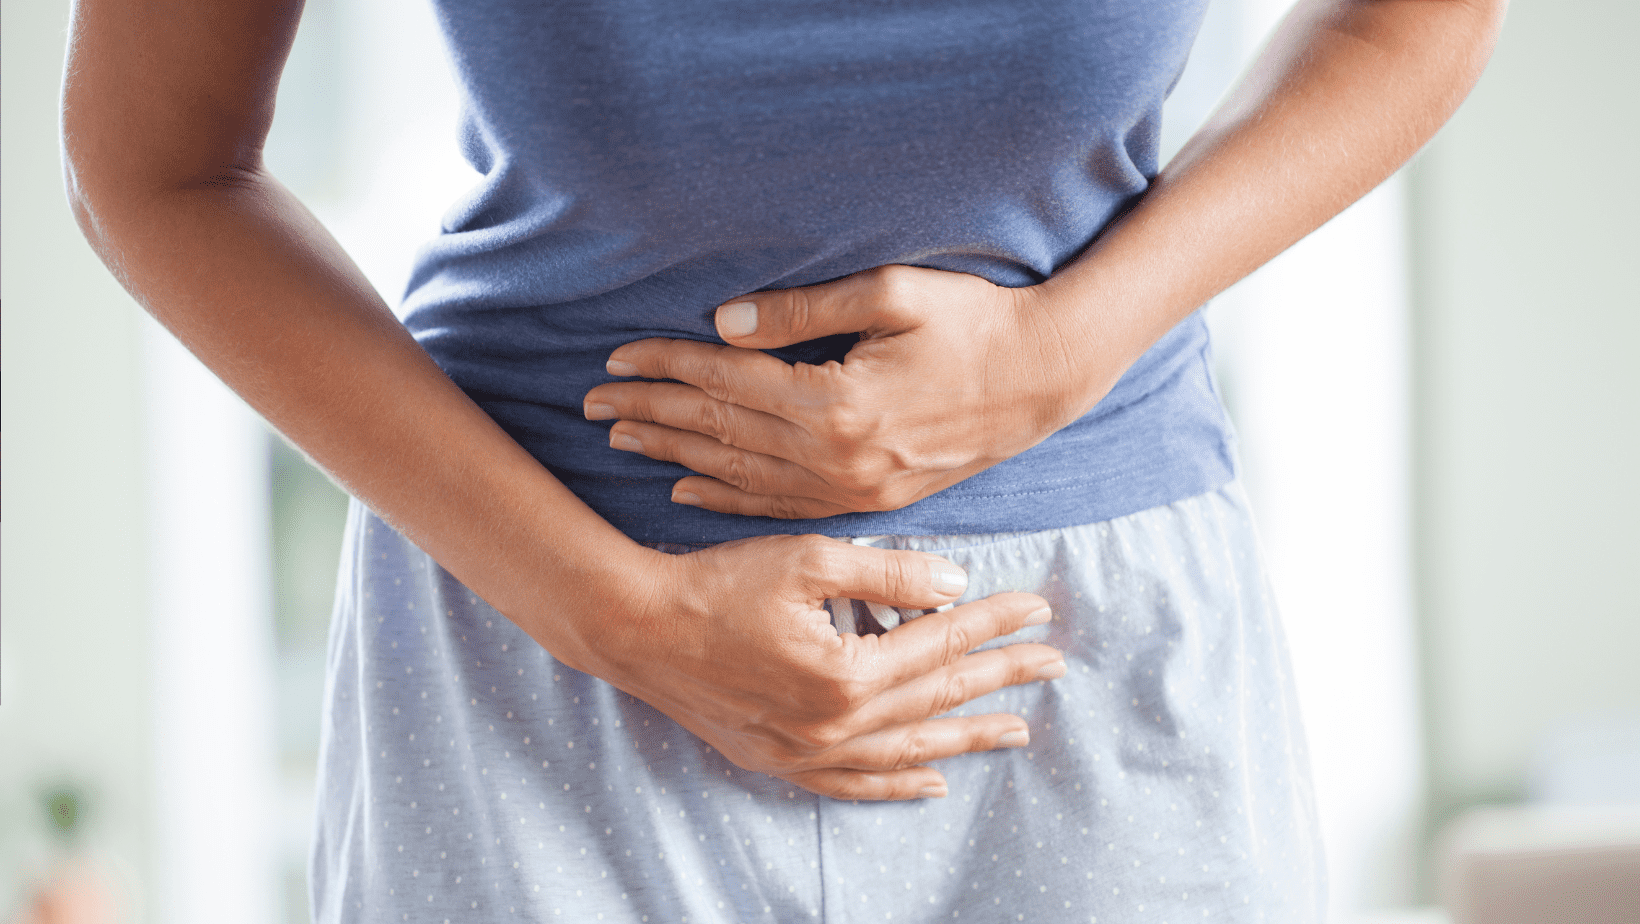 The Myths About Urinary Incontinence